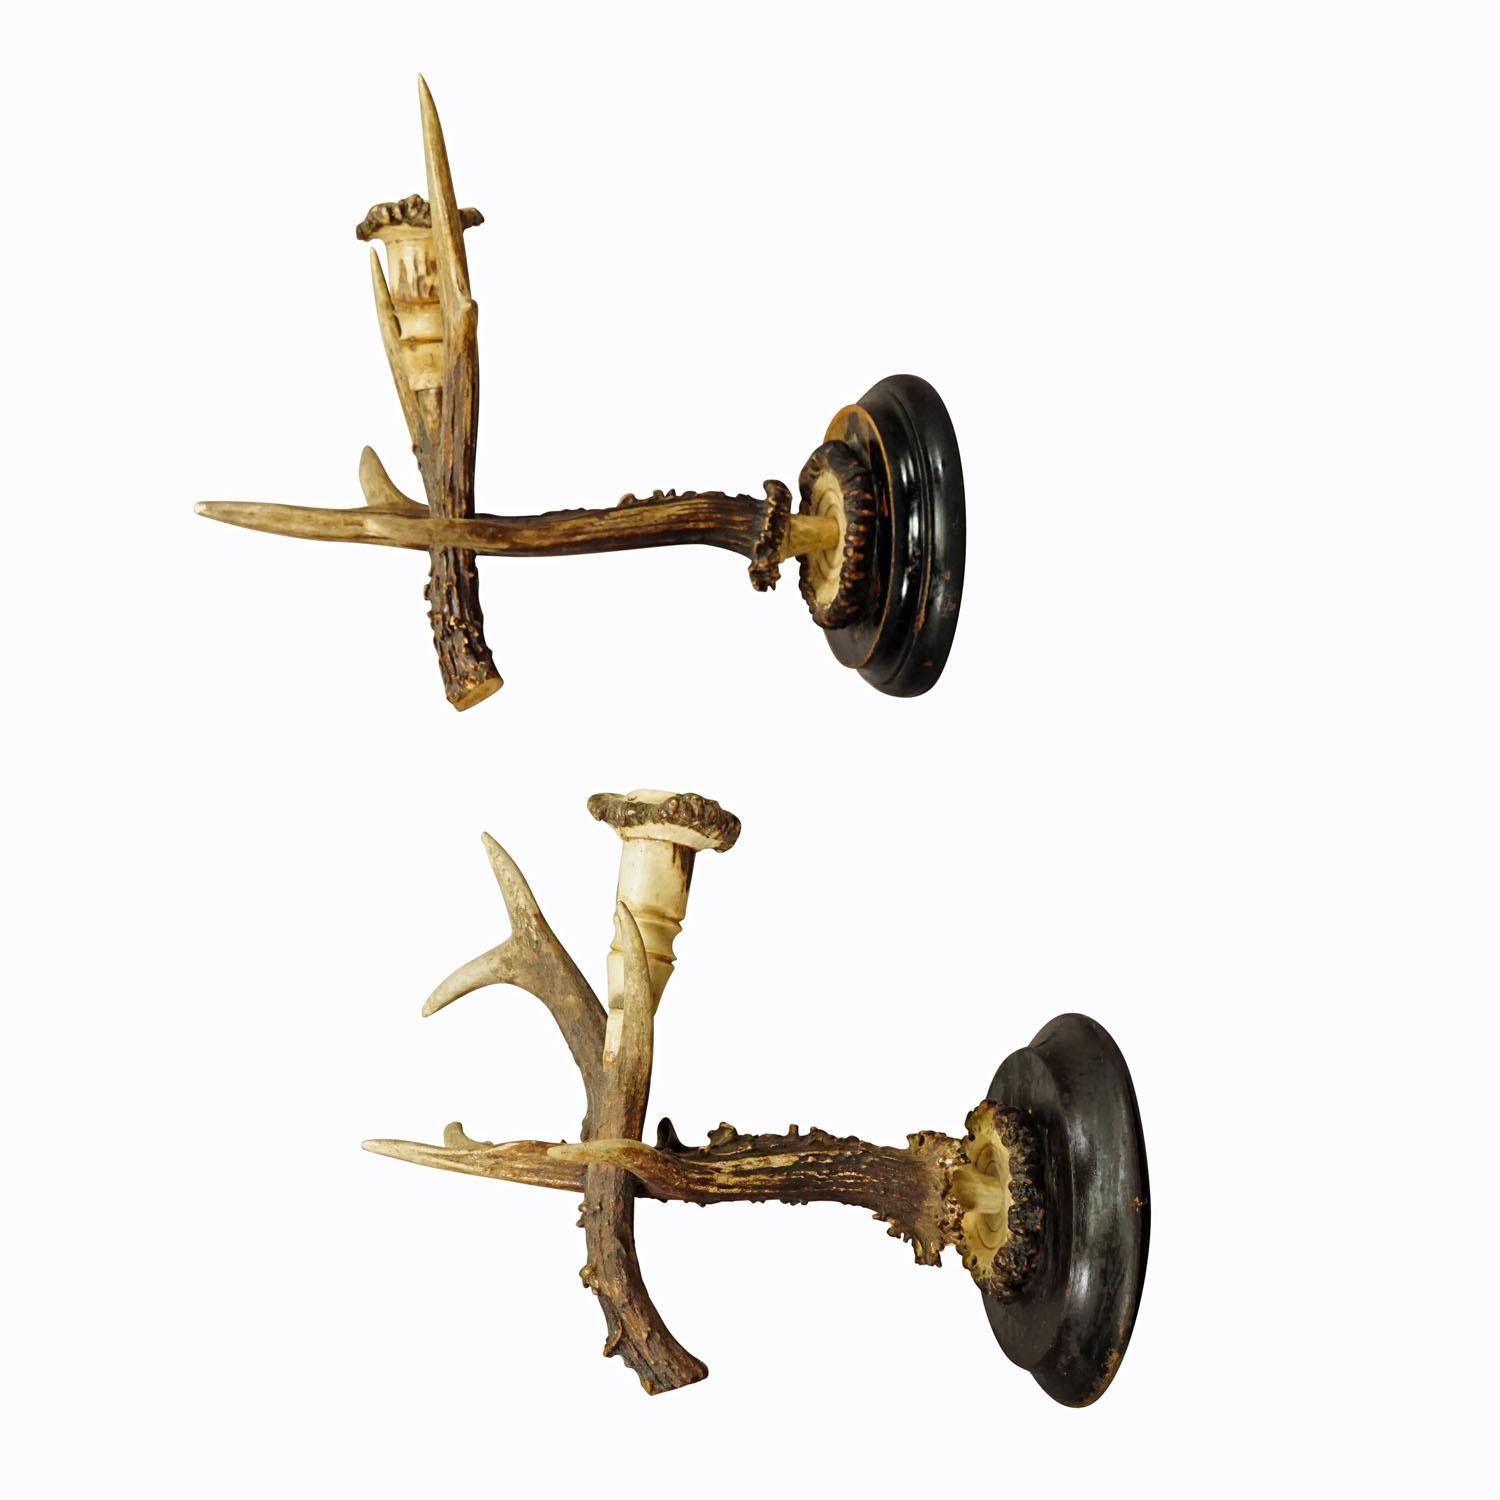 A Pair Black Forest Wall Sconces with Deer Antlers, Germany circa 1900

An antique pair of Black Forest sconces for candles. Each made of original deer antlers which are mounted on a hand carved wooden base. Spouts made of turned deer antlers too.